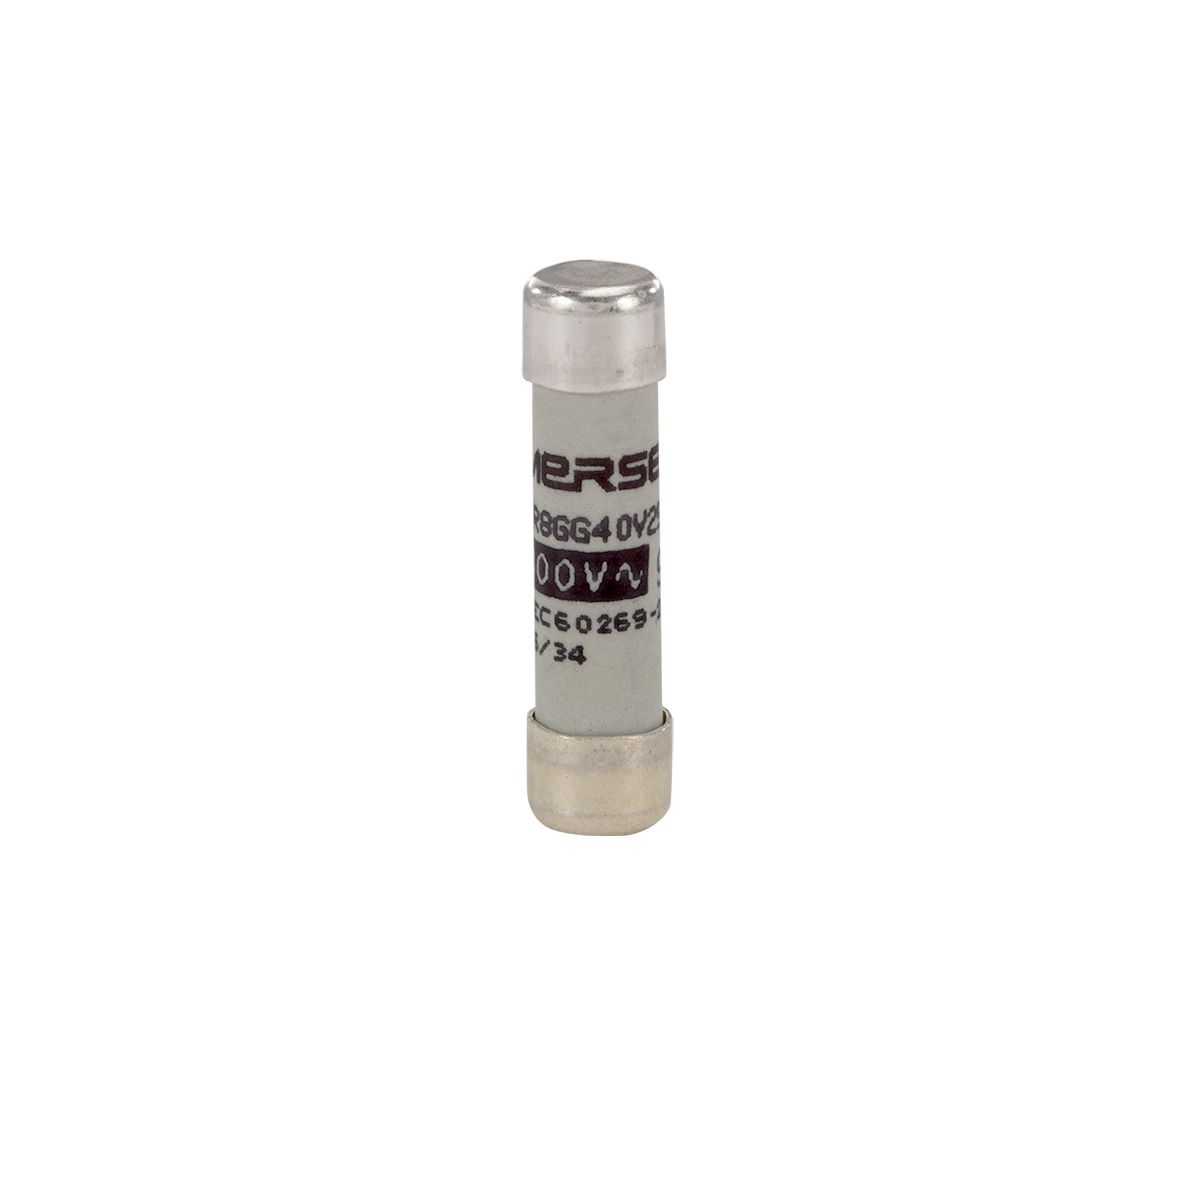 D218710 - Cylindrical fuse-link gG 400VAC 8.5x31.5, 25A